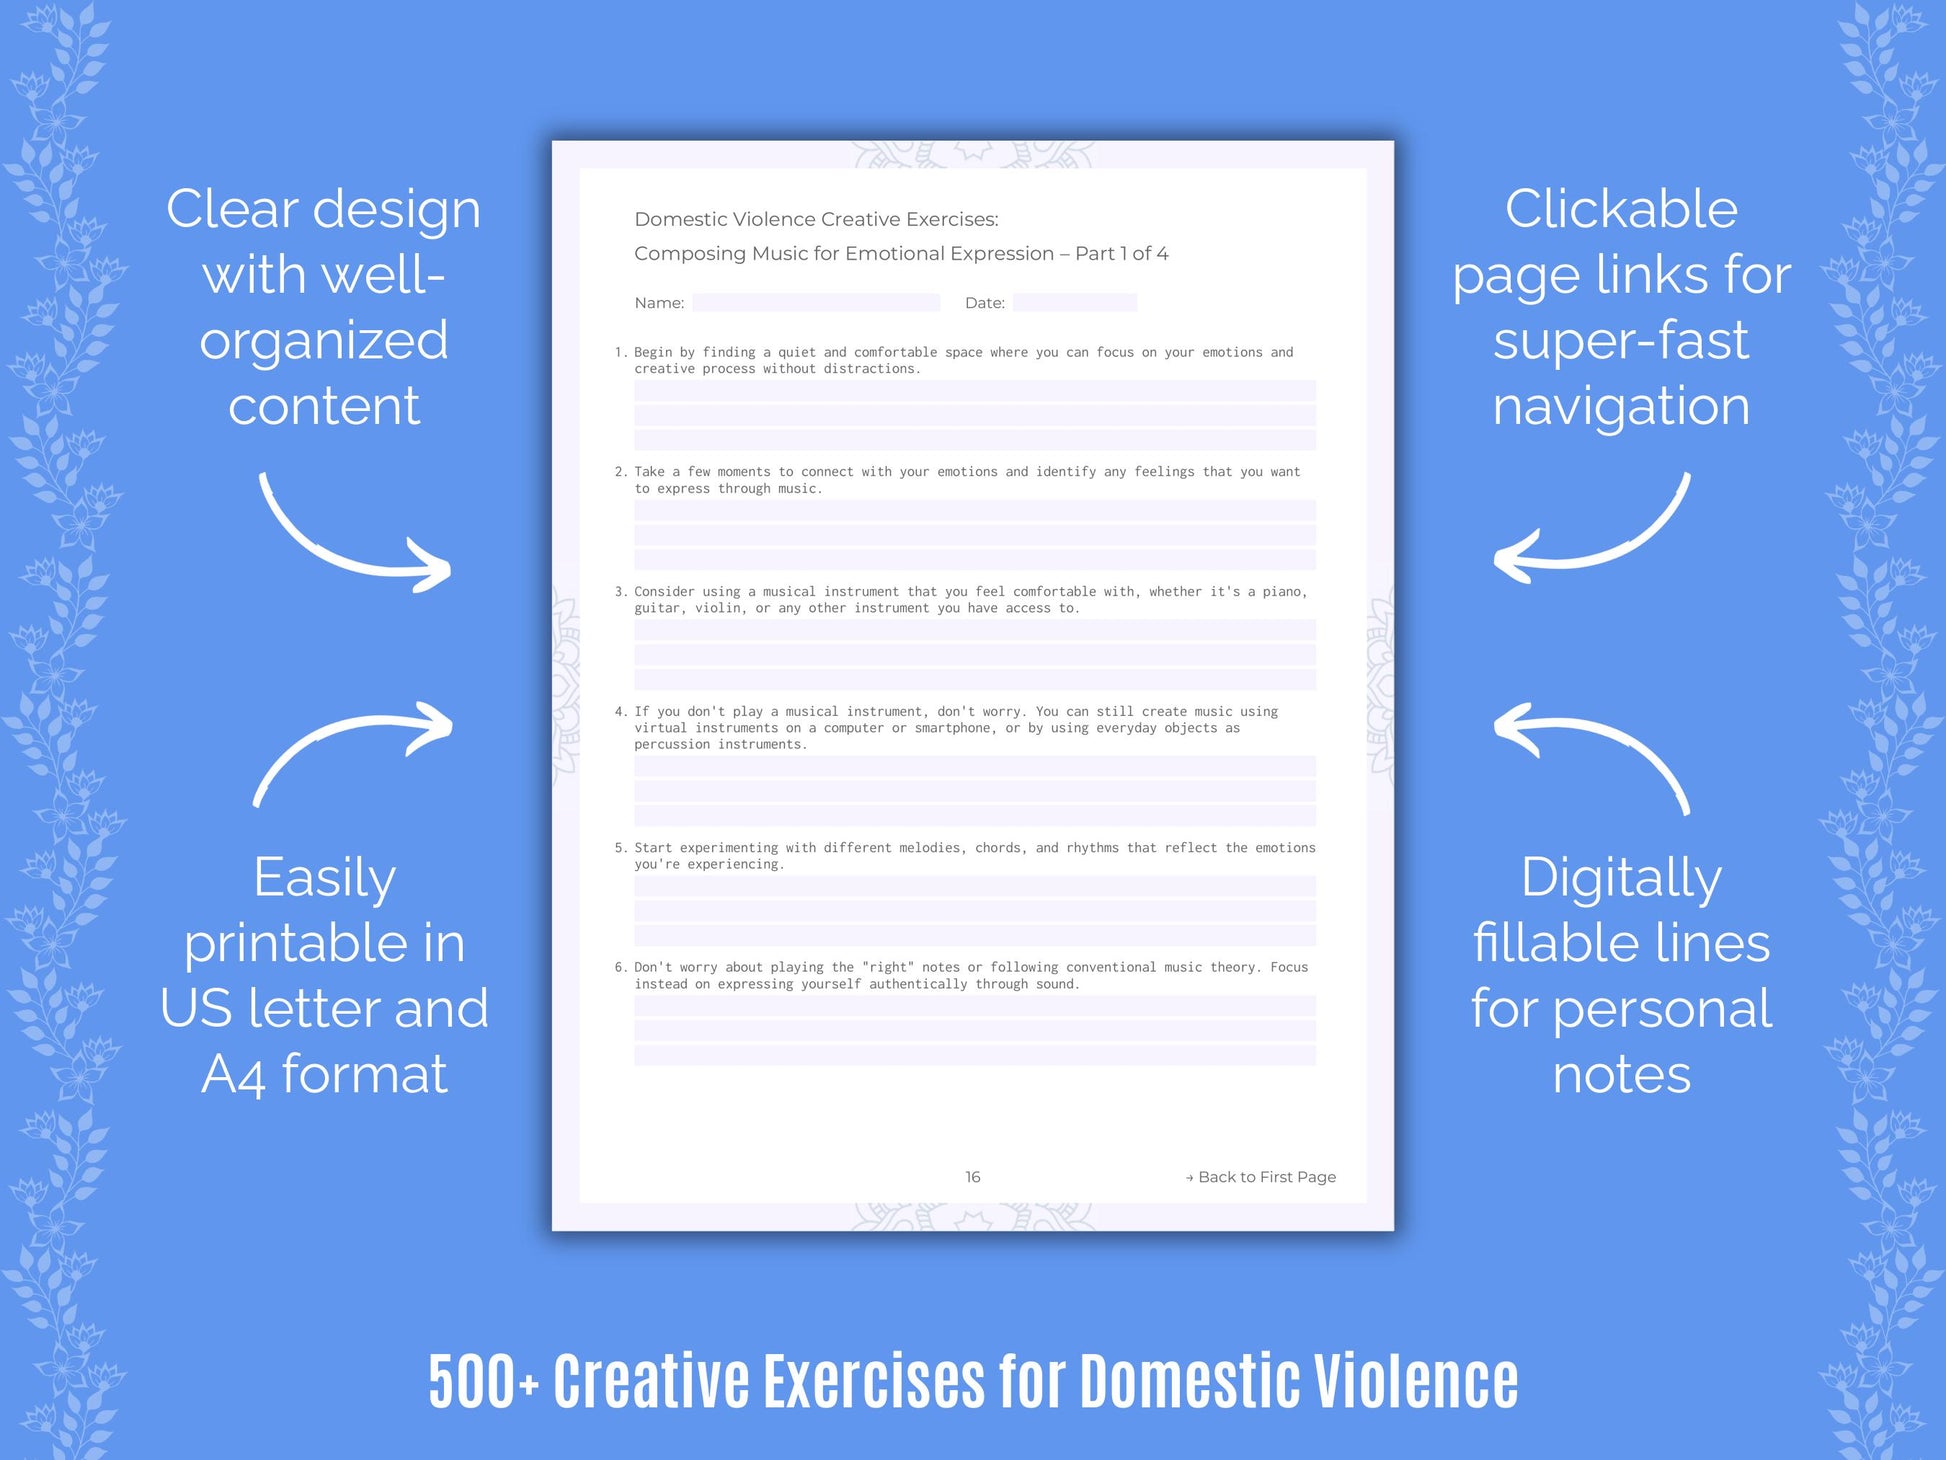 Domestic Violence Creative Exercises Resource